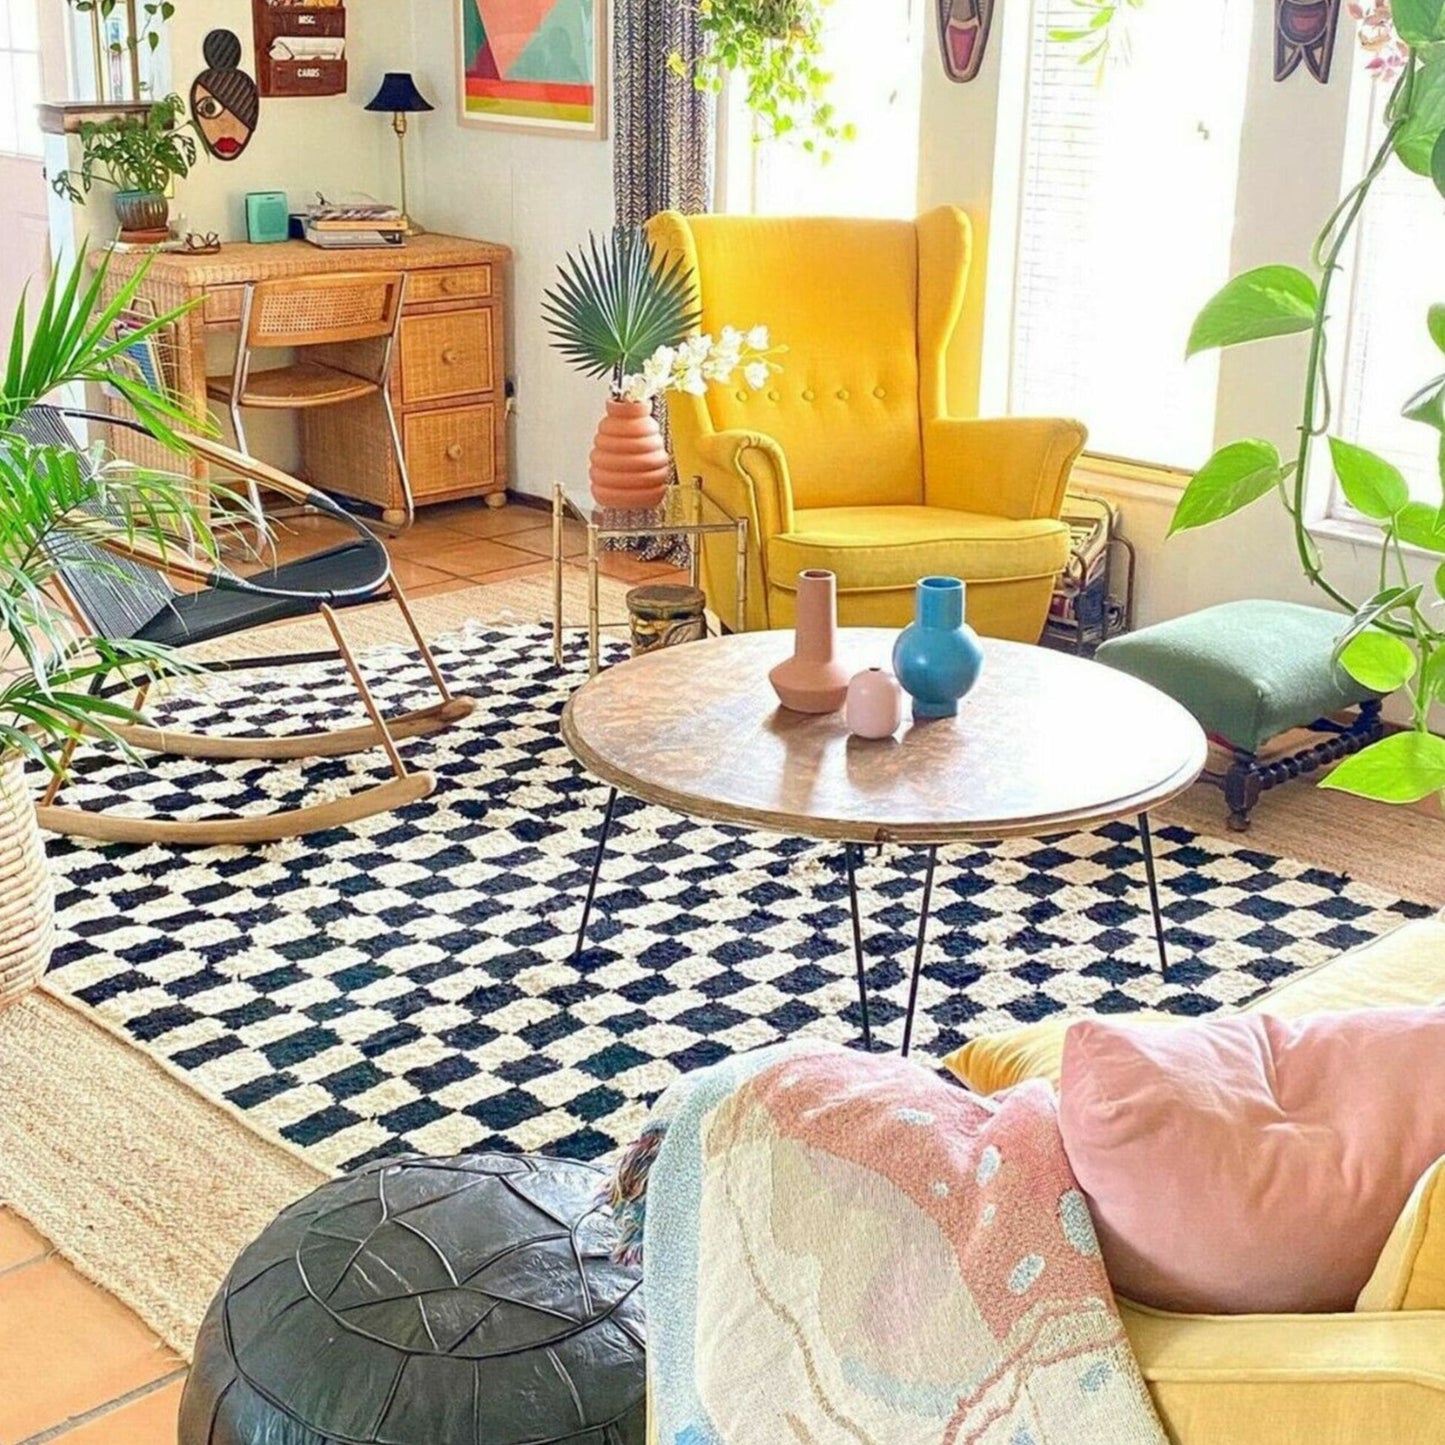 black-and-white-checkered-rug-in-stuning-living-room-with-plants